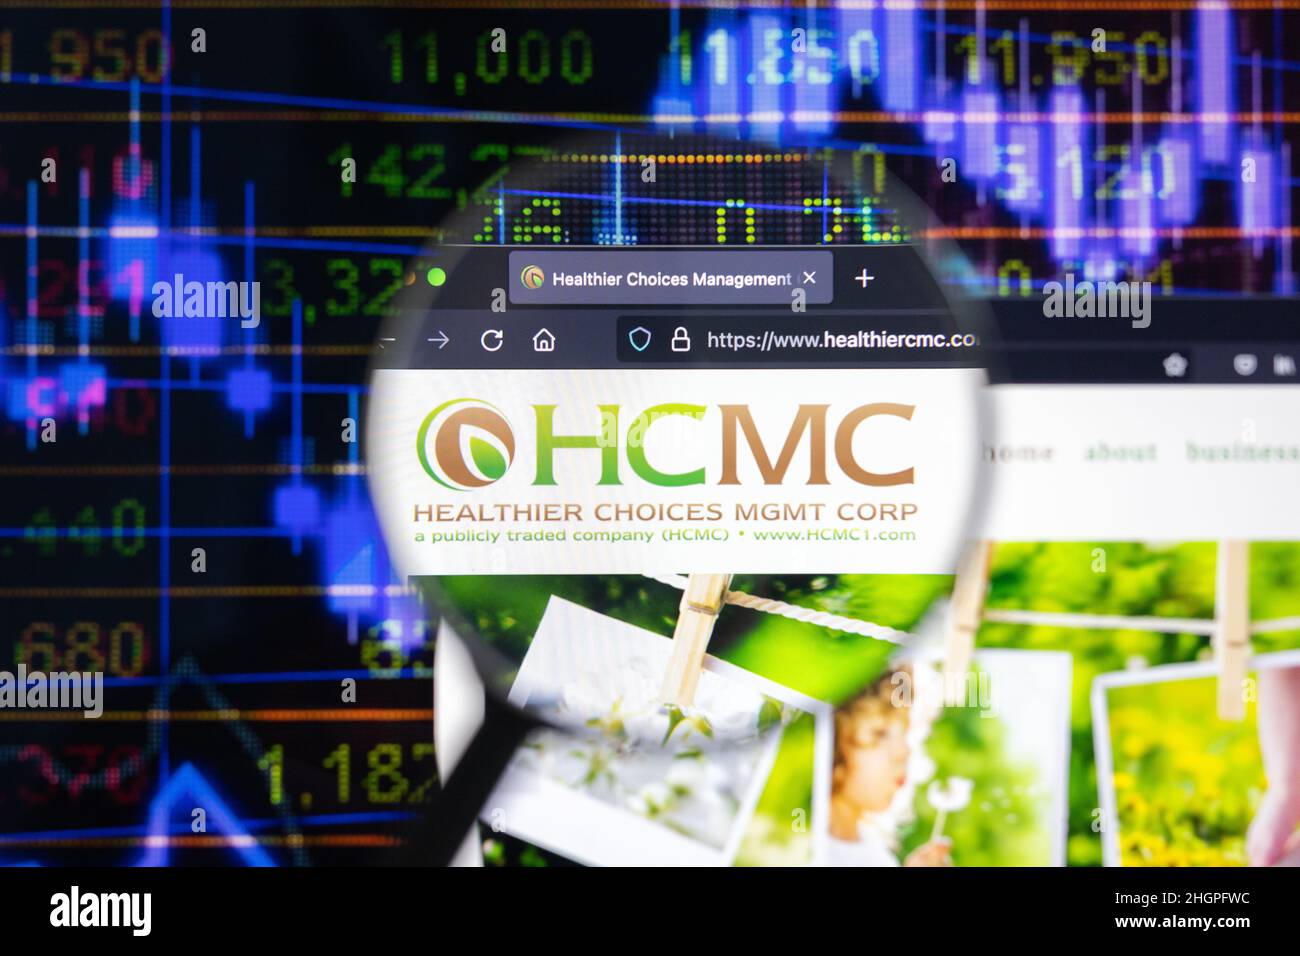 HCMC company logo on a website with blurry stock market developments in the background, seen on a computer screen through a magnifying glass. Stock Photo